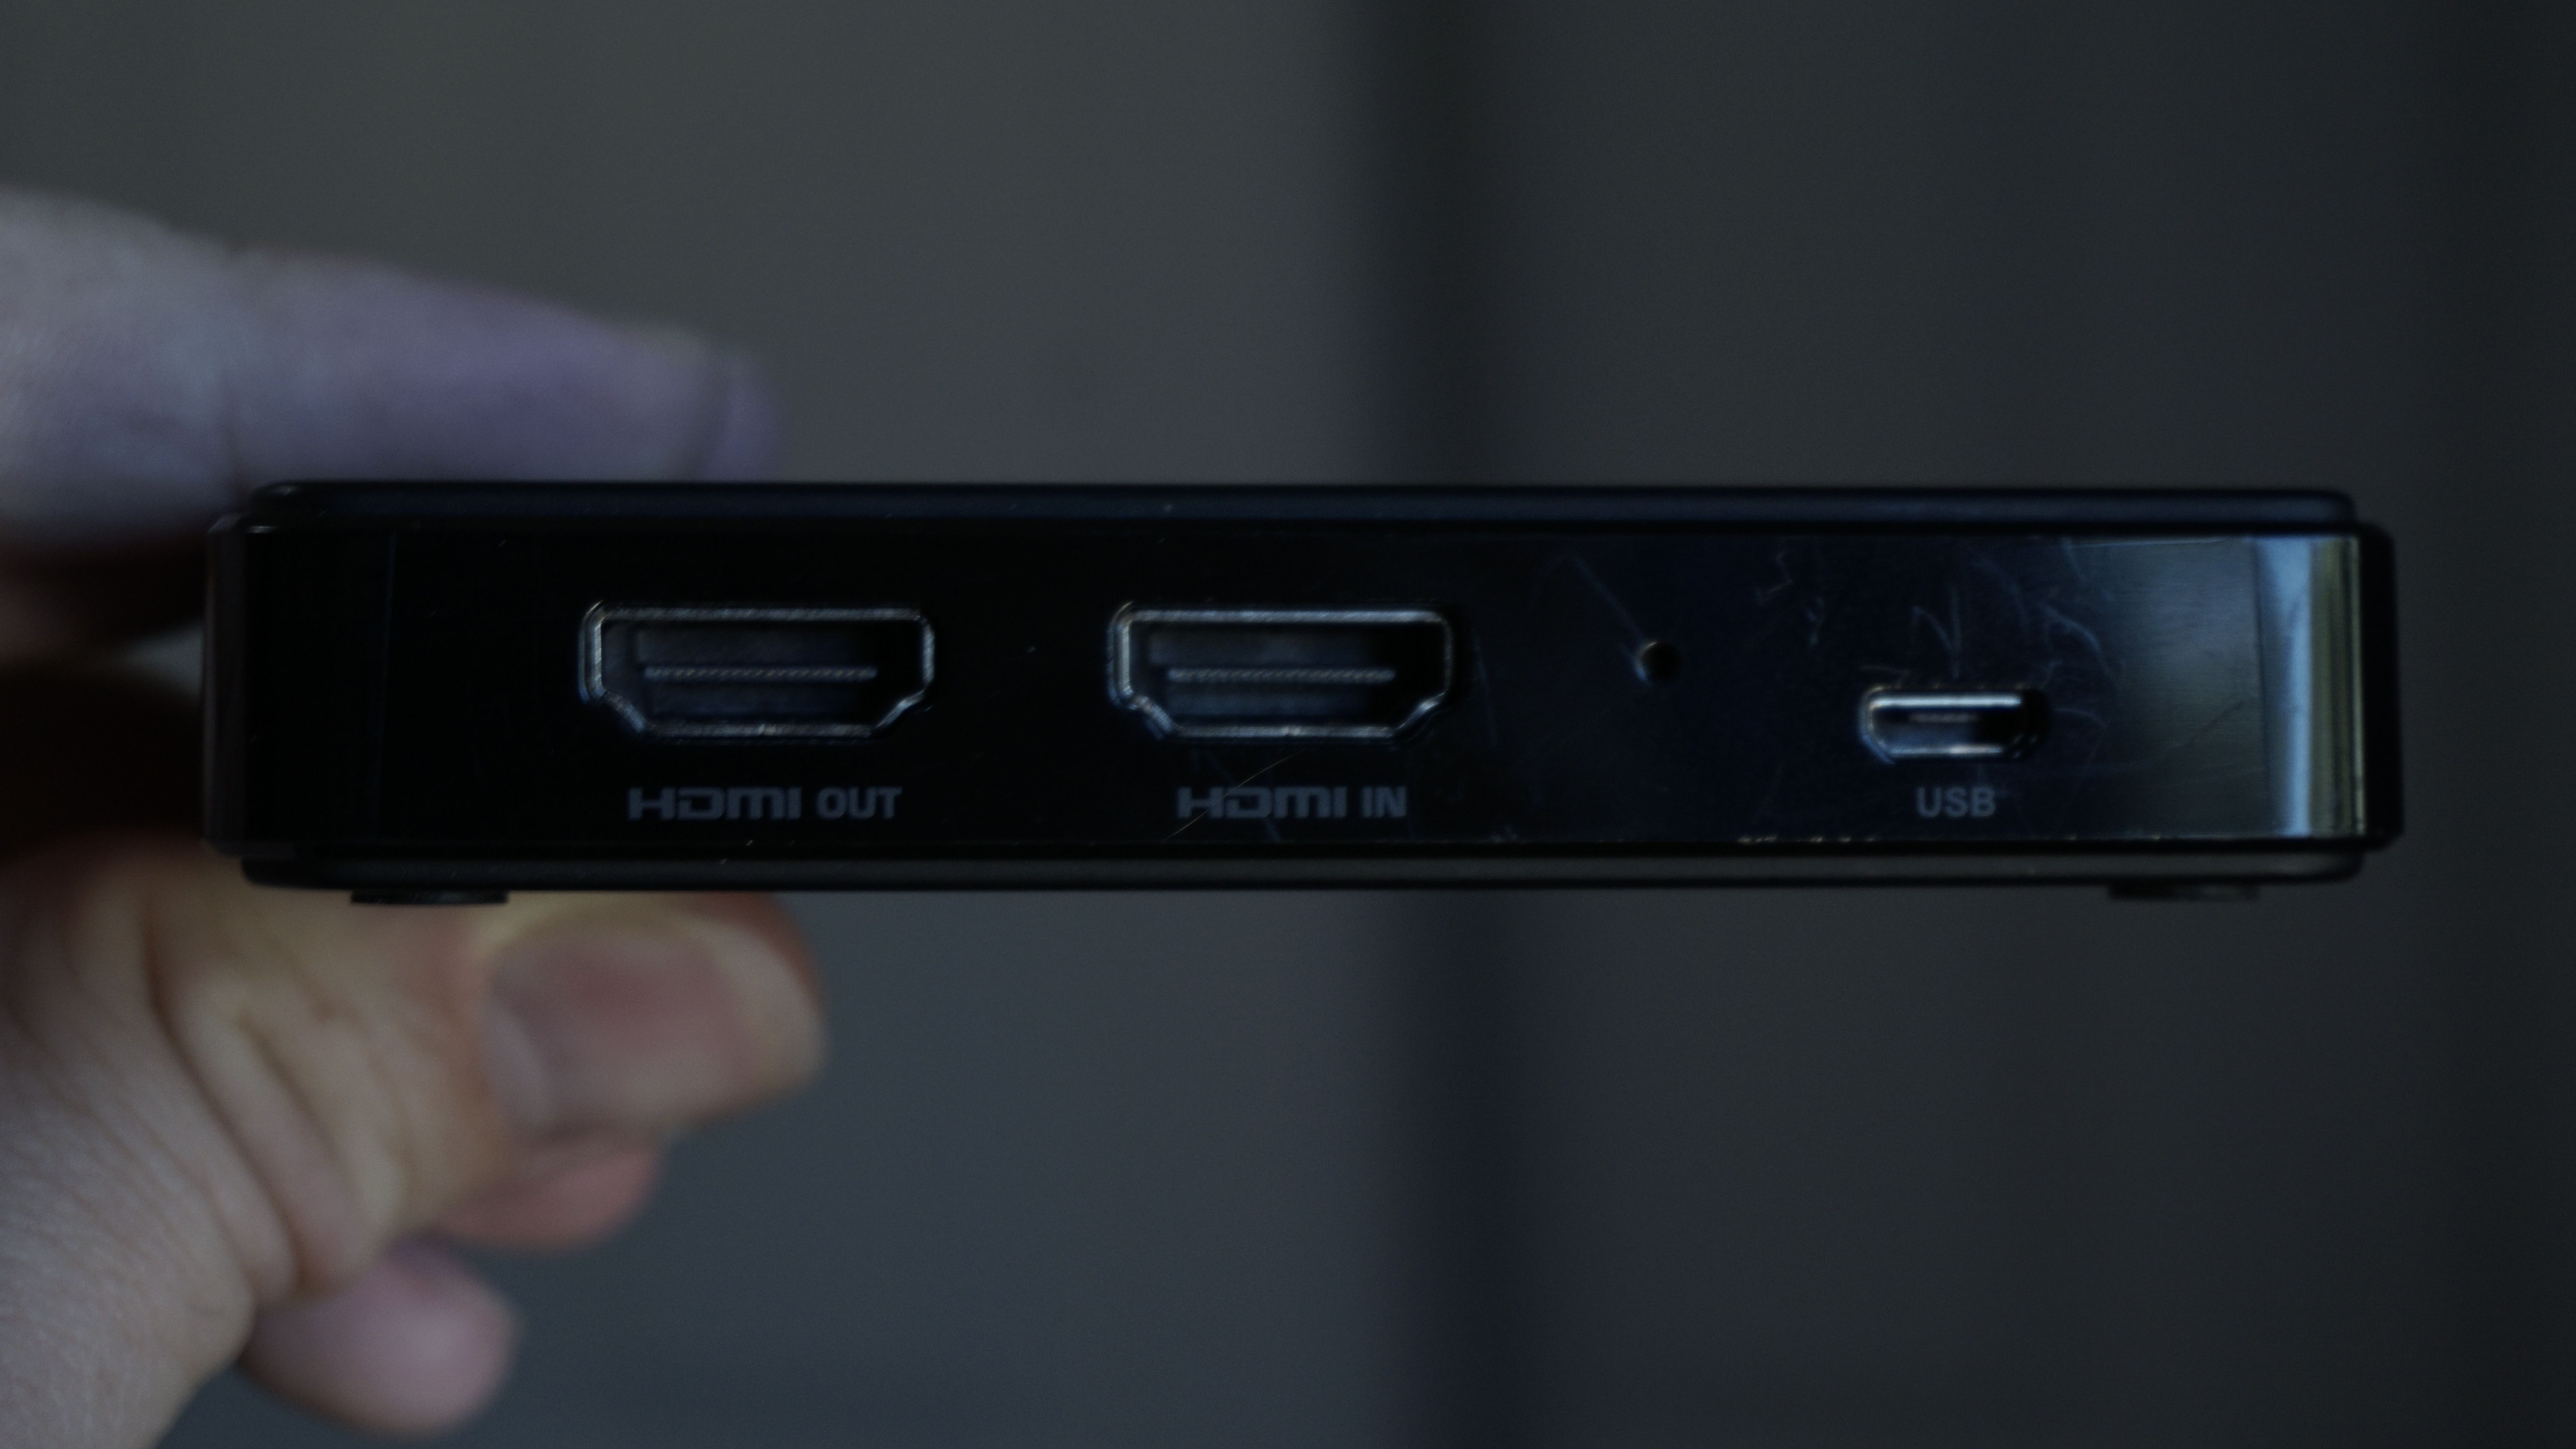 Holding a capture card and showing its HDMI in/out and USB ports